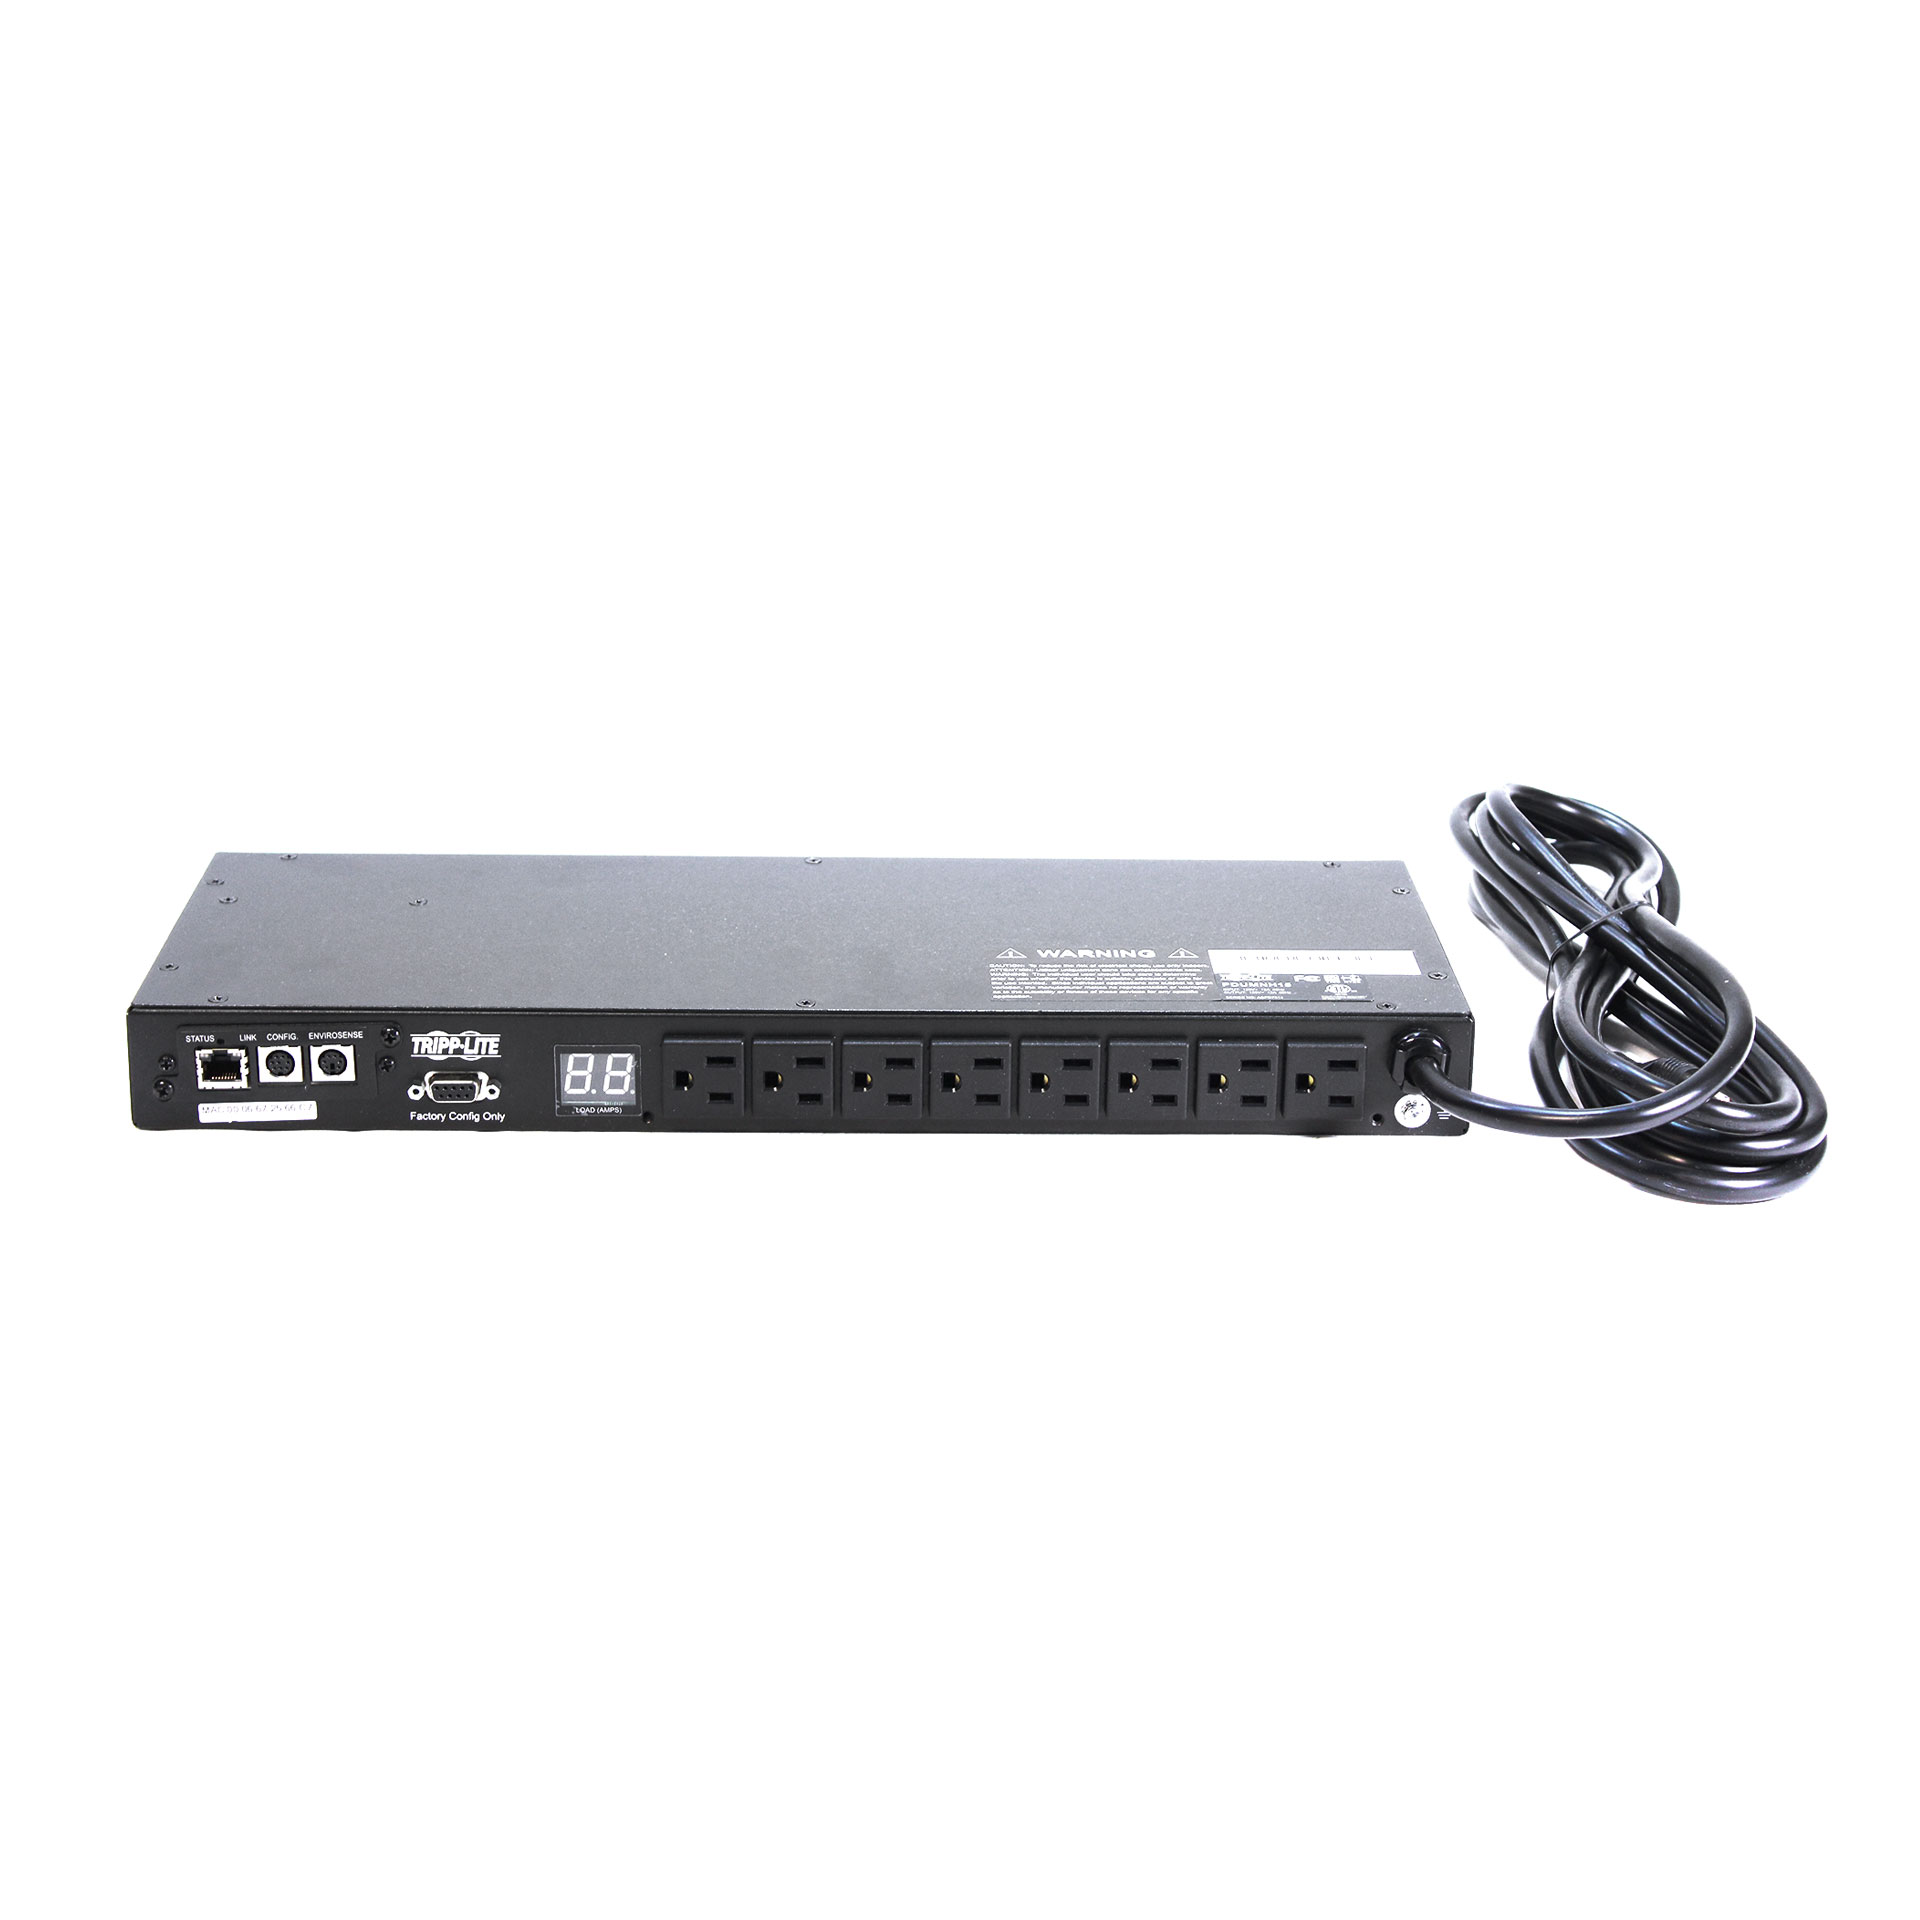 Tripp Lite PDU Monitored PDUMNH15 120V 15A 5-15R 8 Outlet 5-15P - Click Image to Close